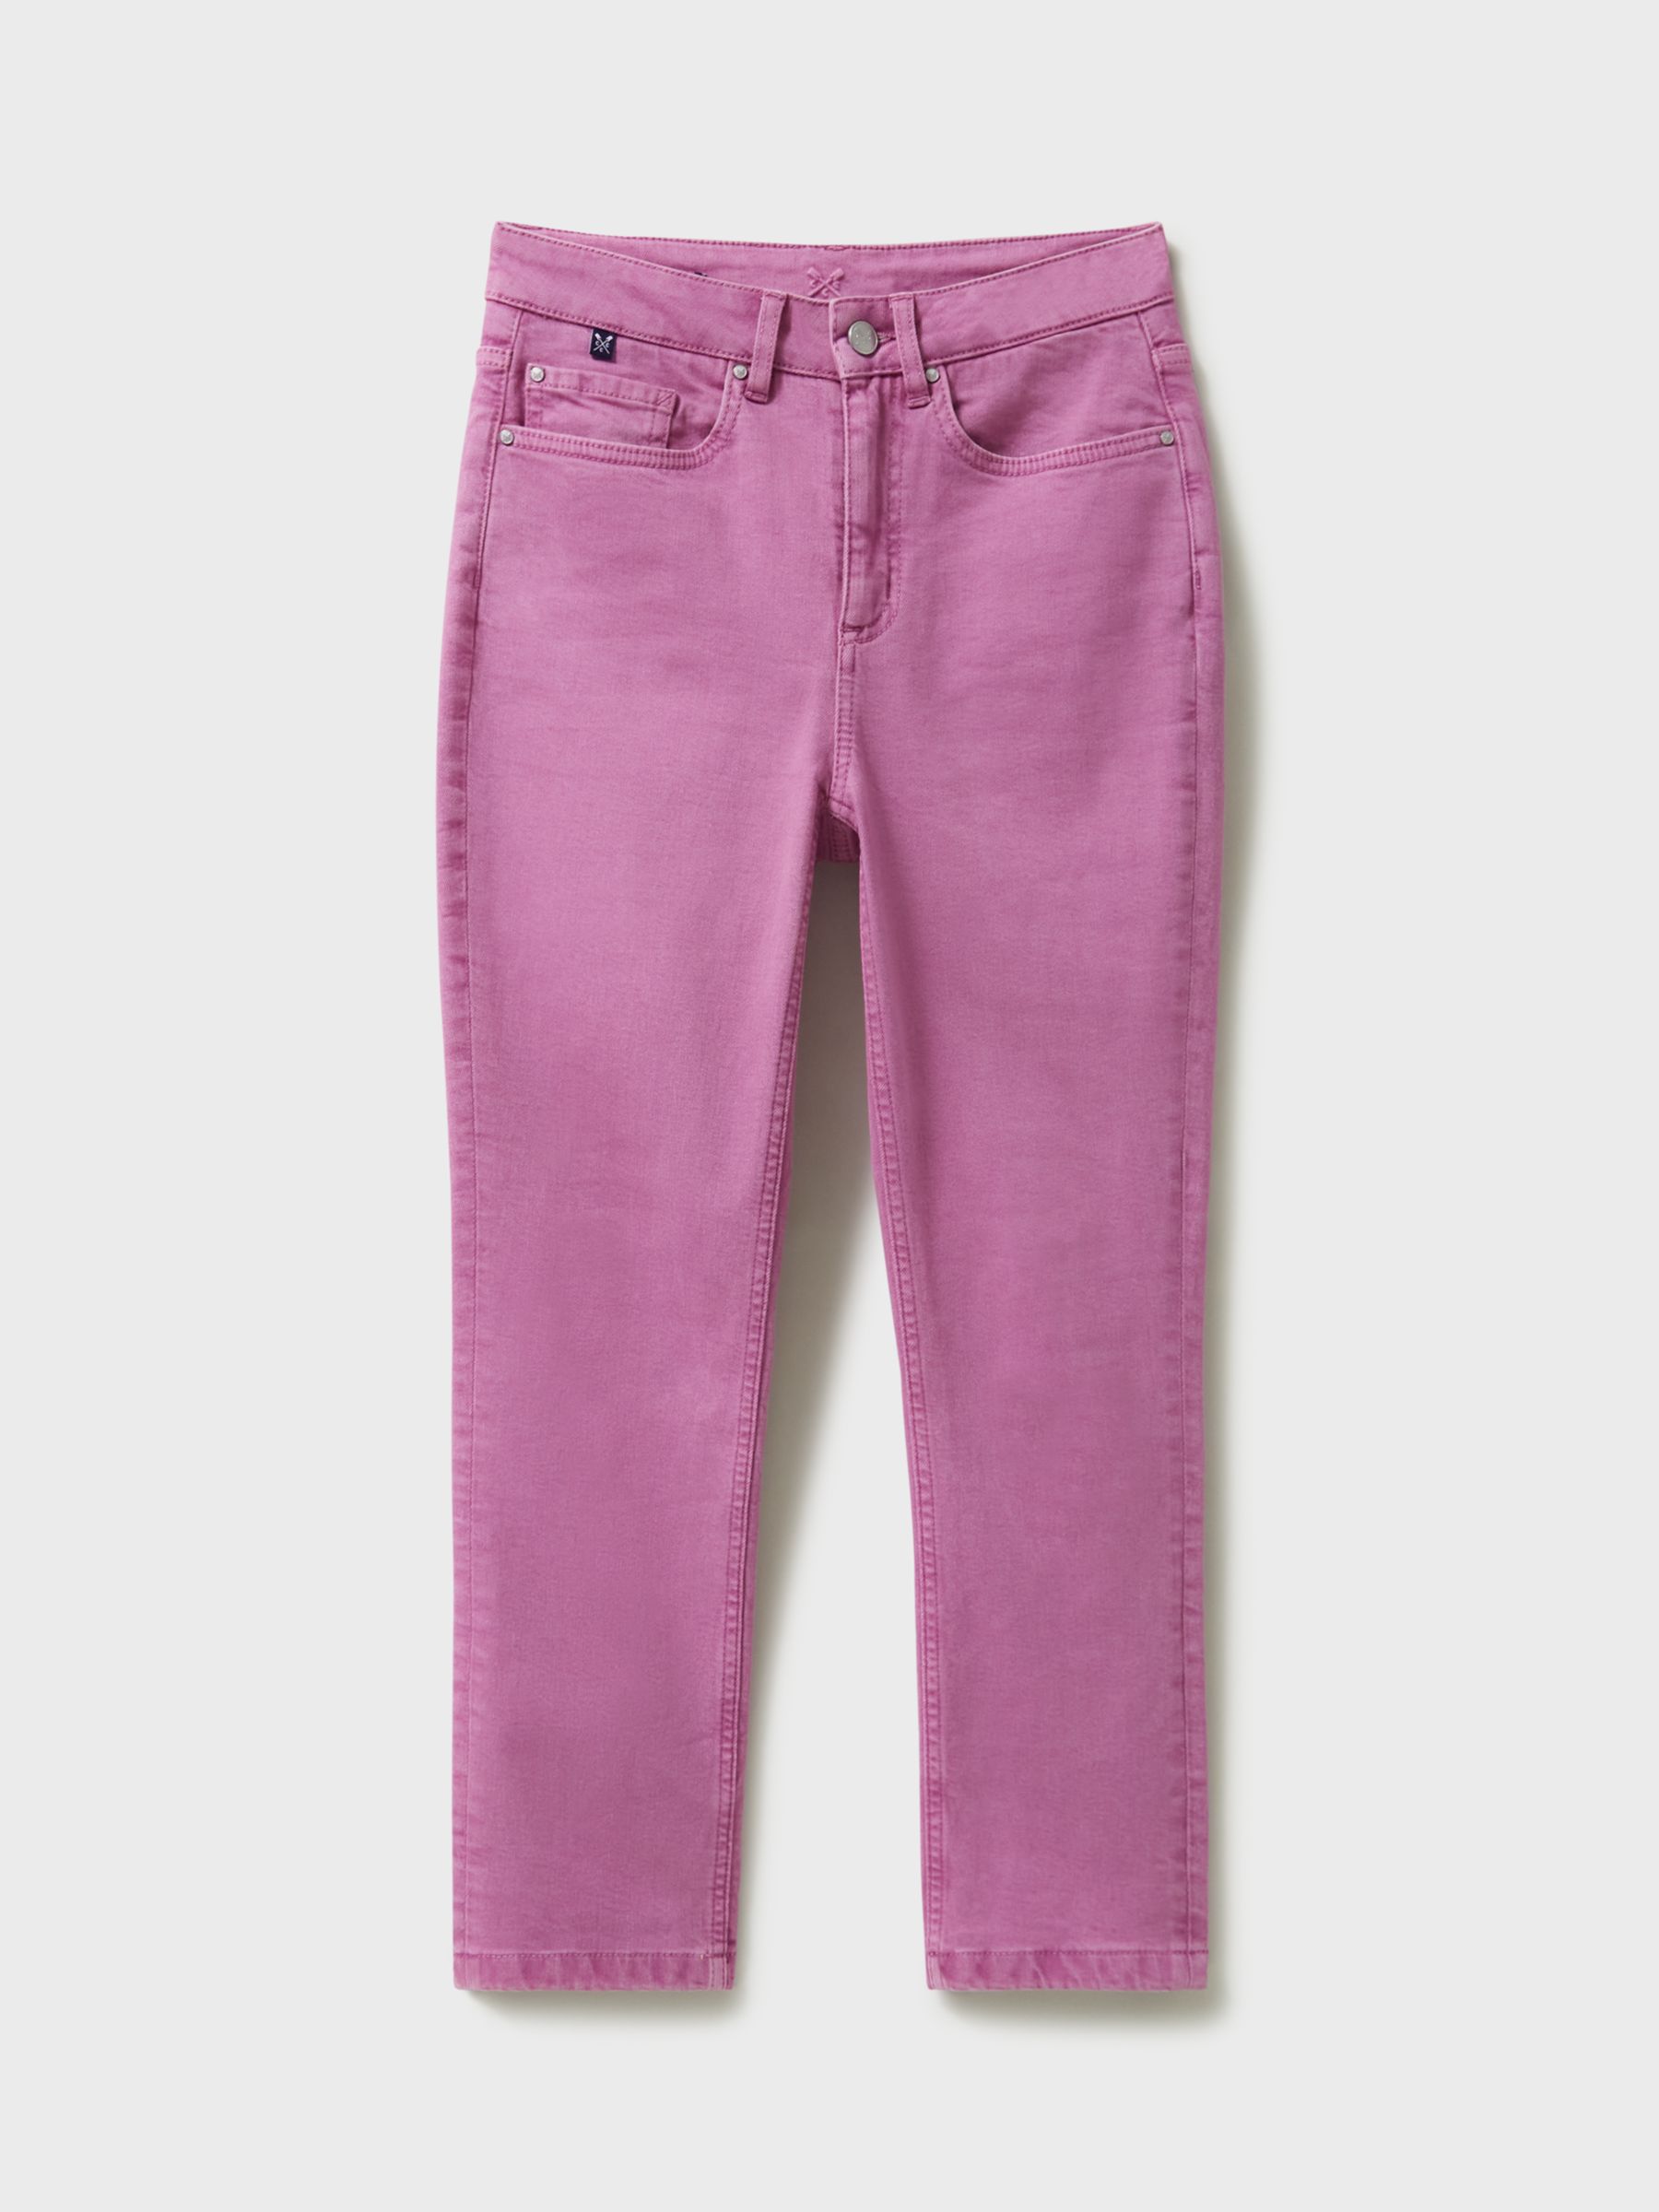 Crew Clothing Cropped Jeans, Pastel Pink, 6